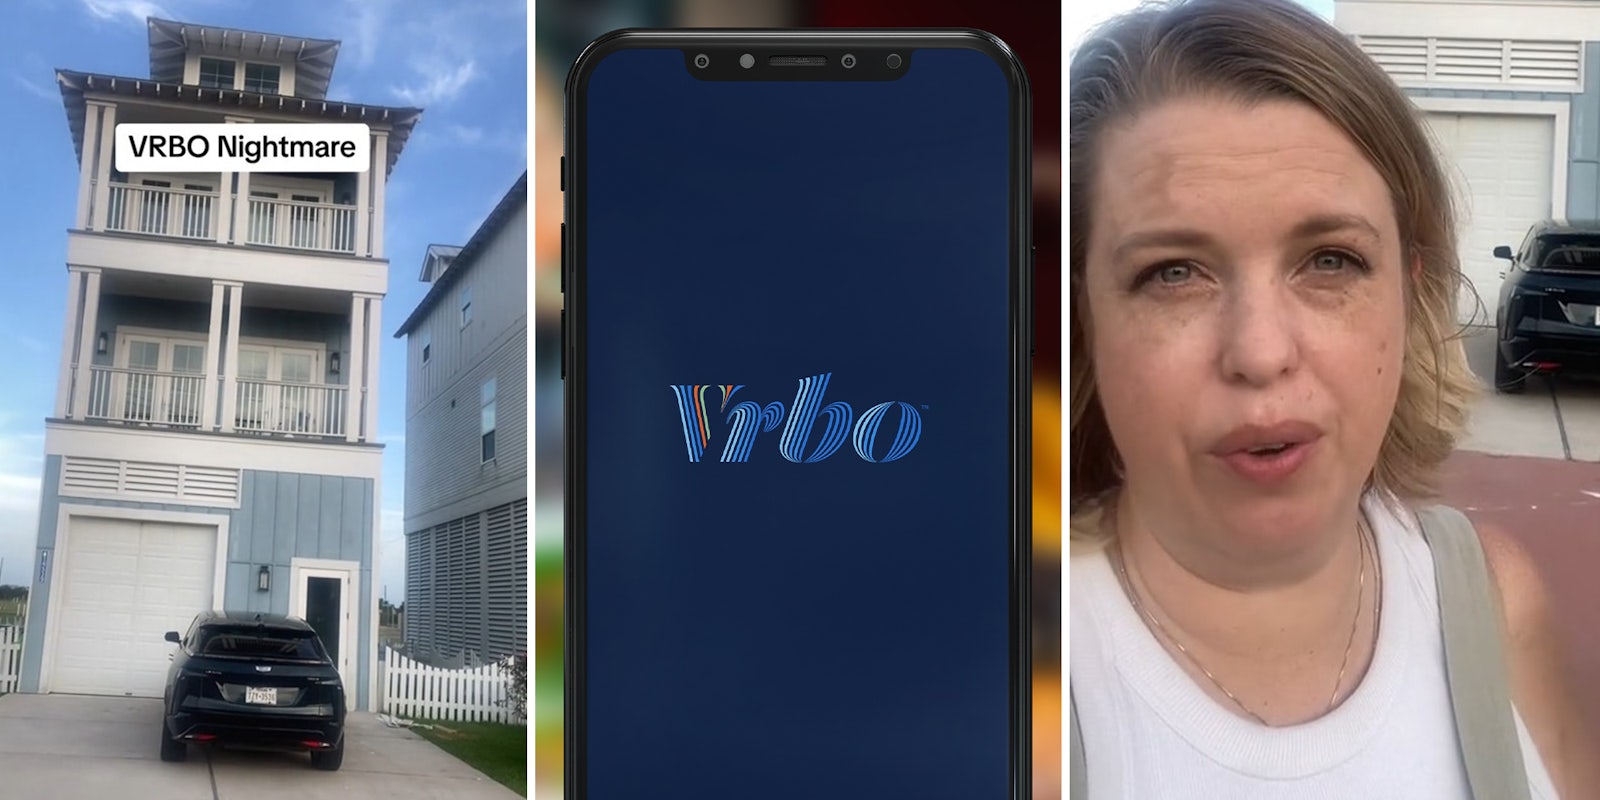 Traveler rents ‘VRBO nightmare’ when she realizes that her rental is hosting an estate sale. Customer service is doing nothing